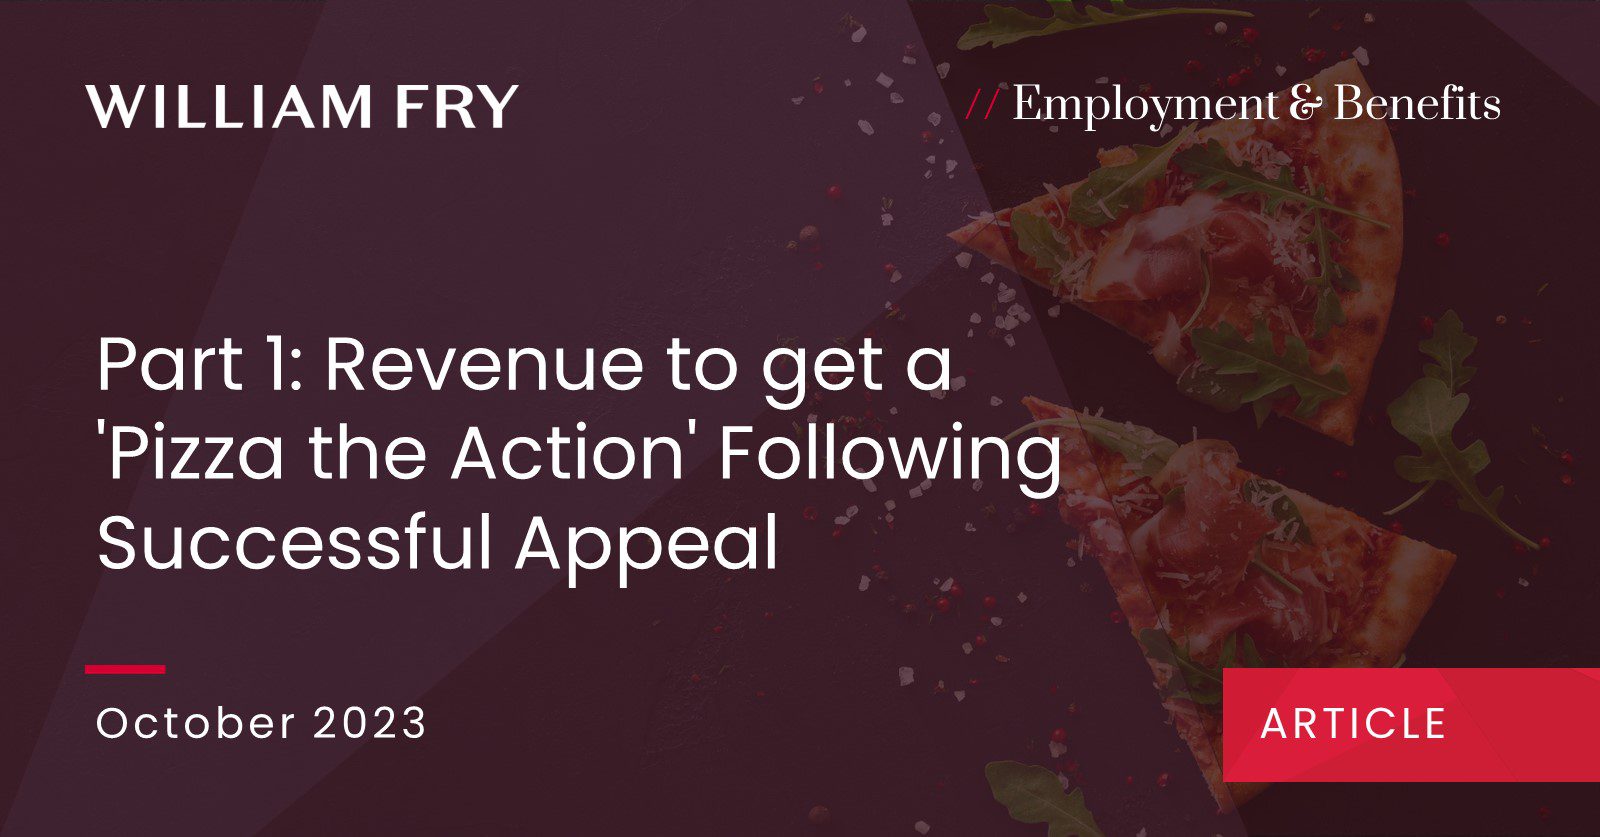 Part 1: Revenue to get a 'Pizza the Action' Following Successful Appeal